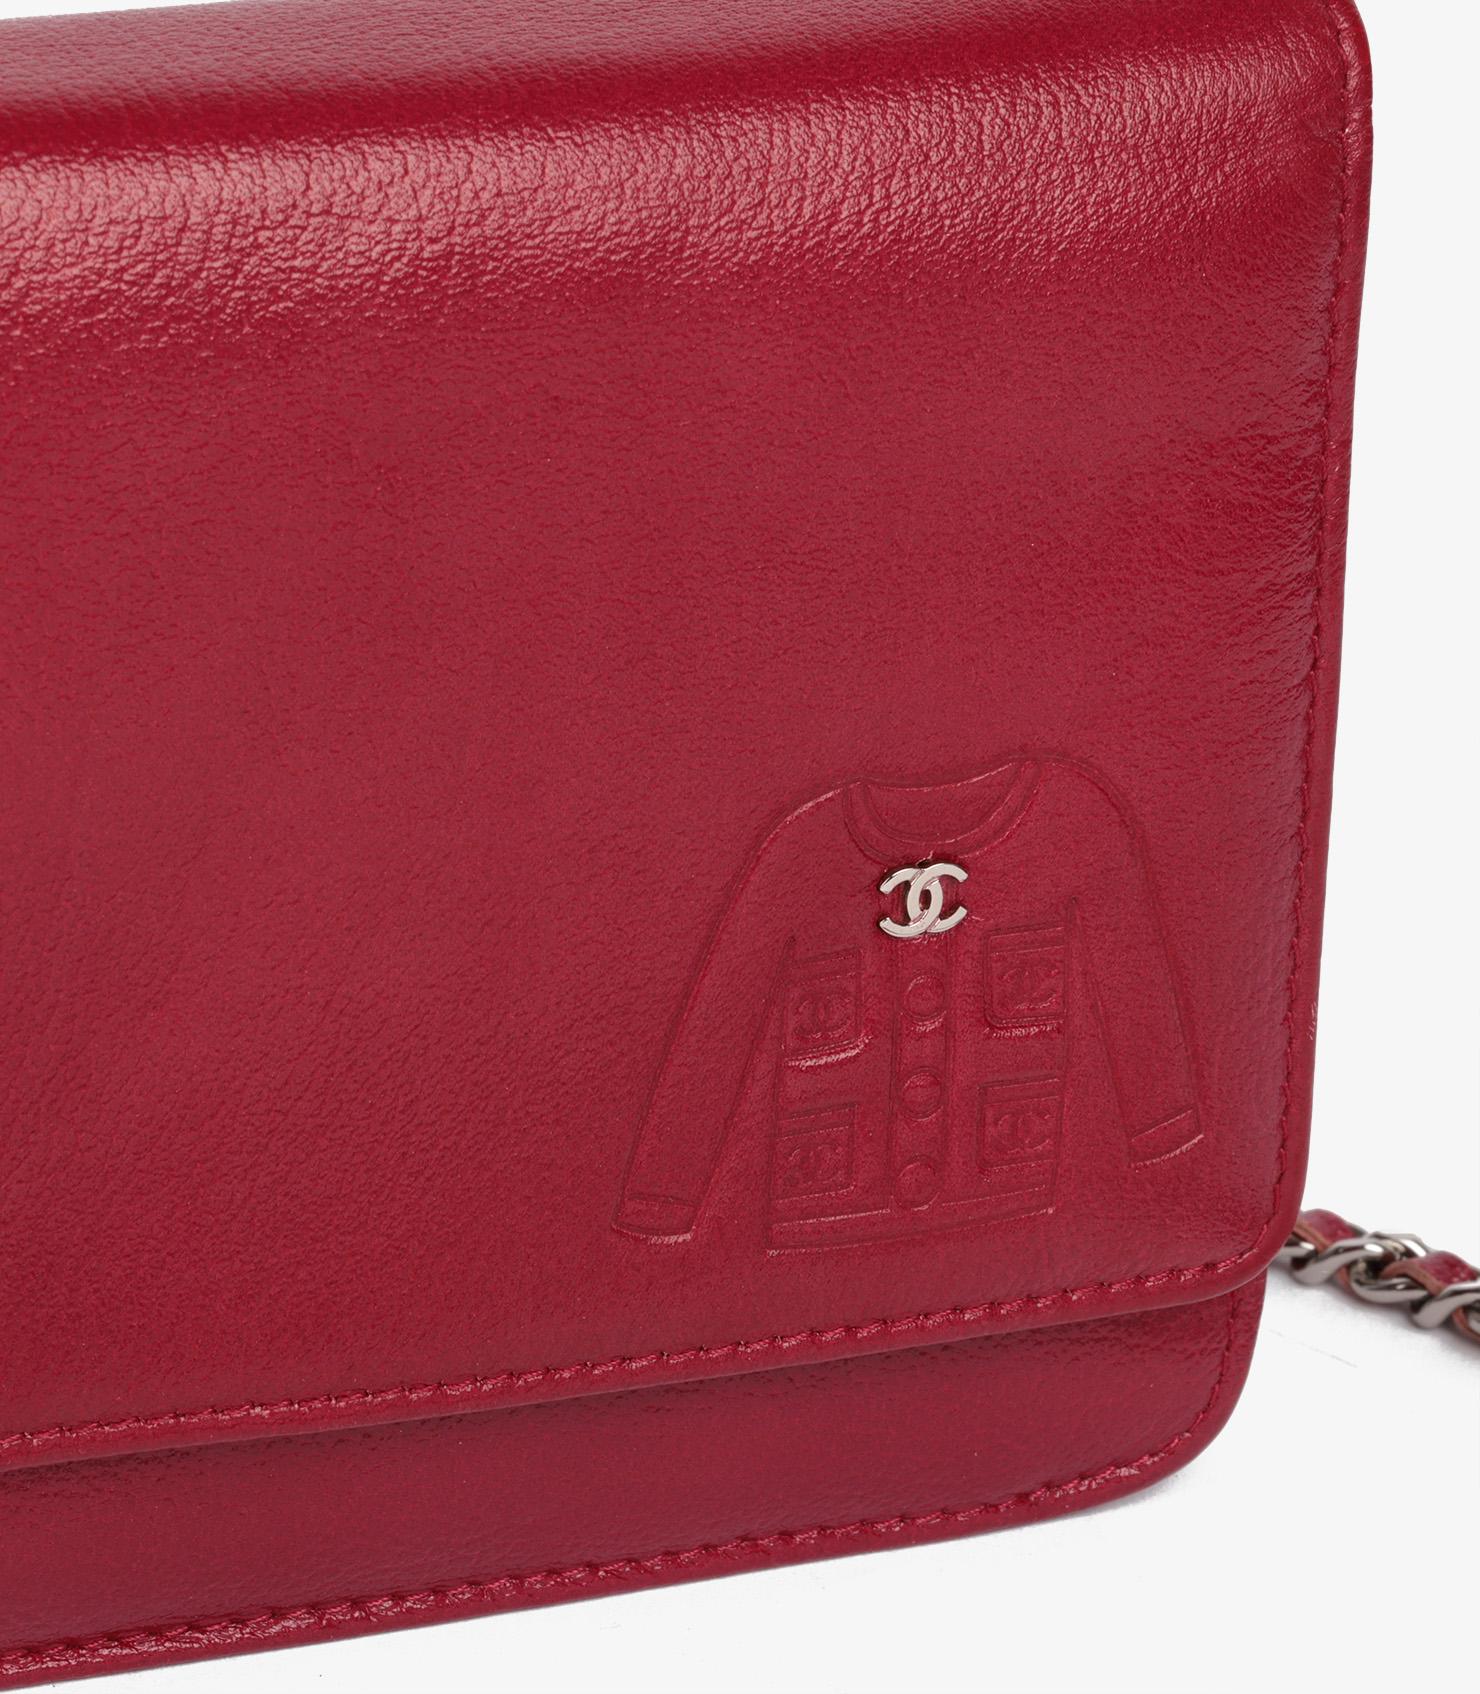 Chanel Red Goatskin Leather Mademoiselle Jacket Embossed Wallet-On-Chain WOC For Sale 4